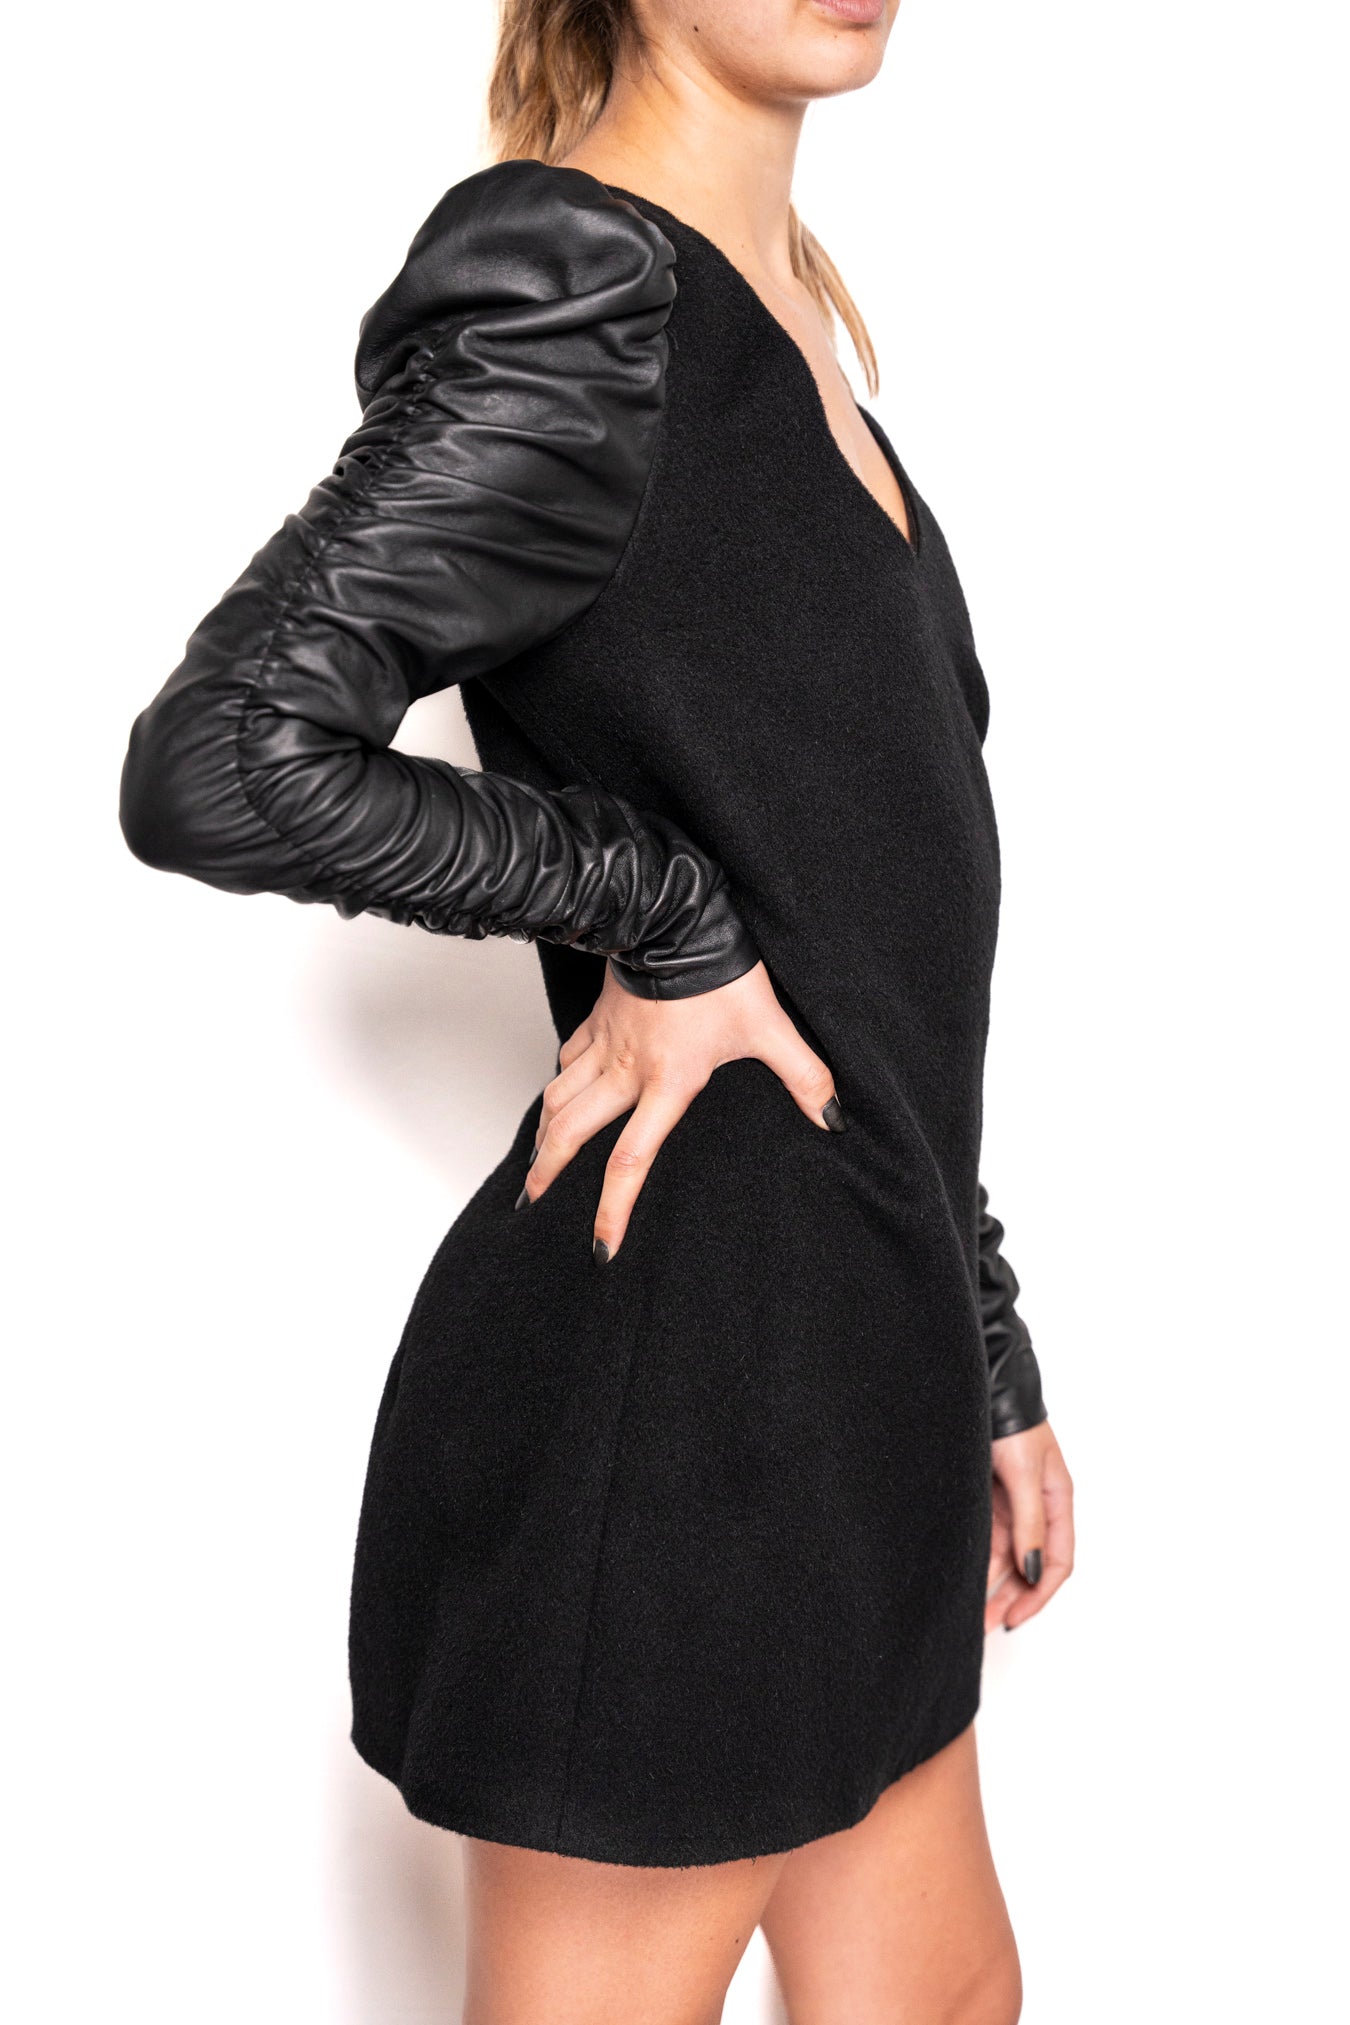 The Little Black Dress in Alpaca and Leather